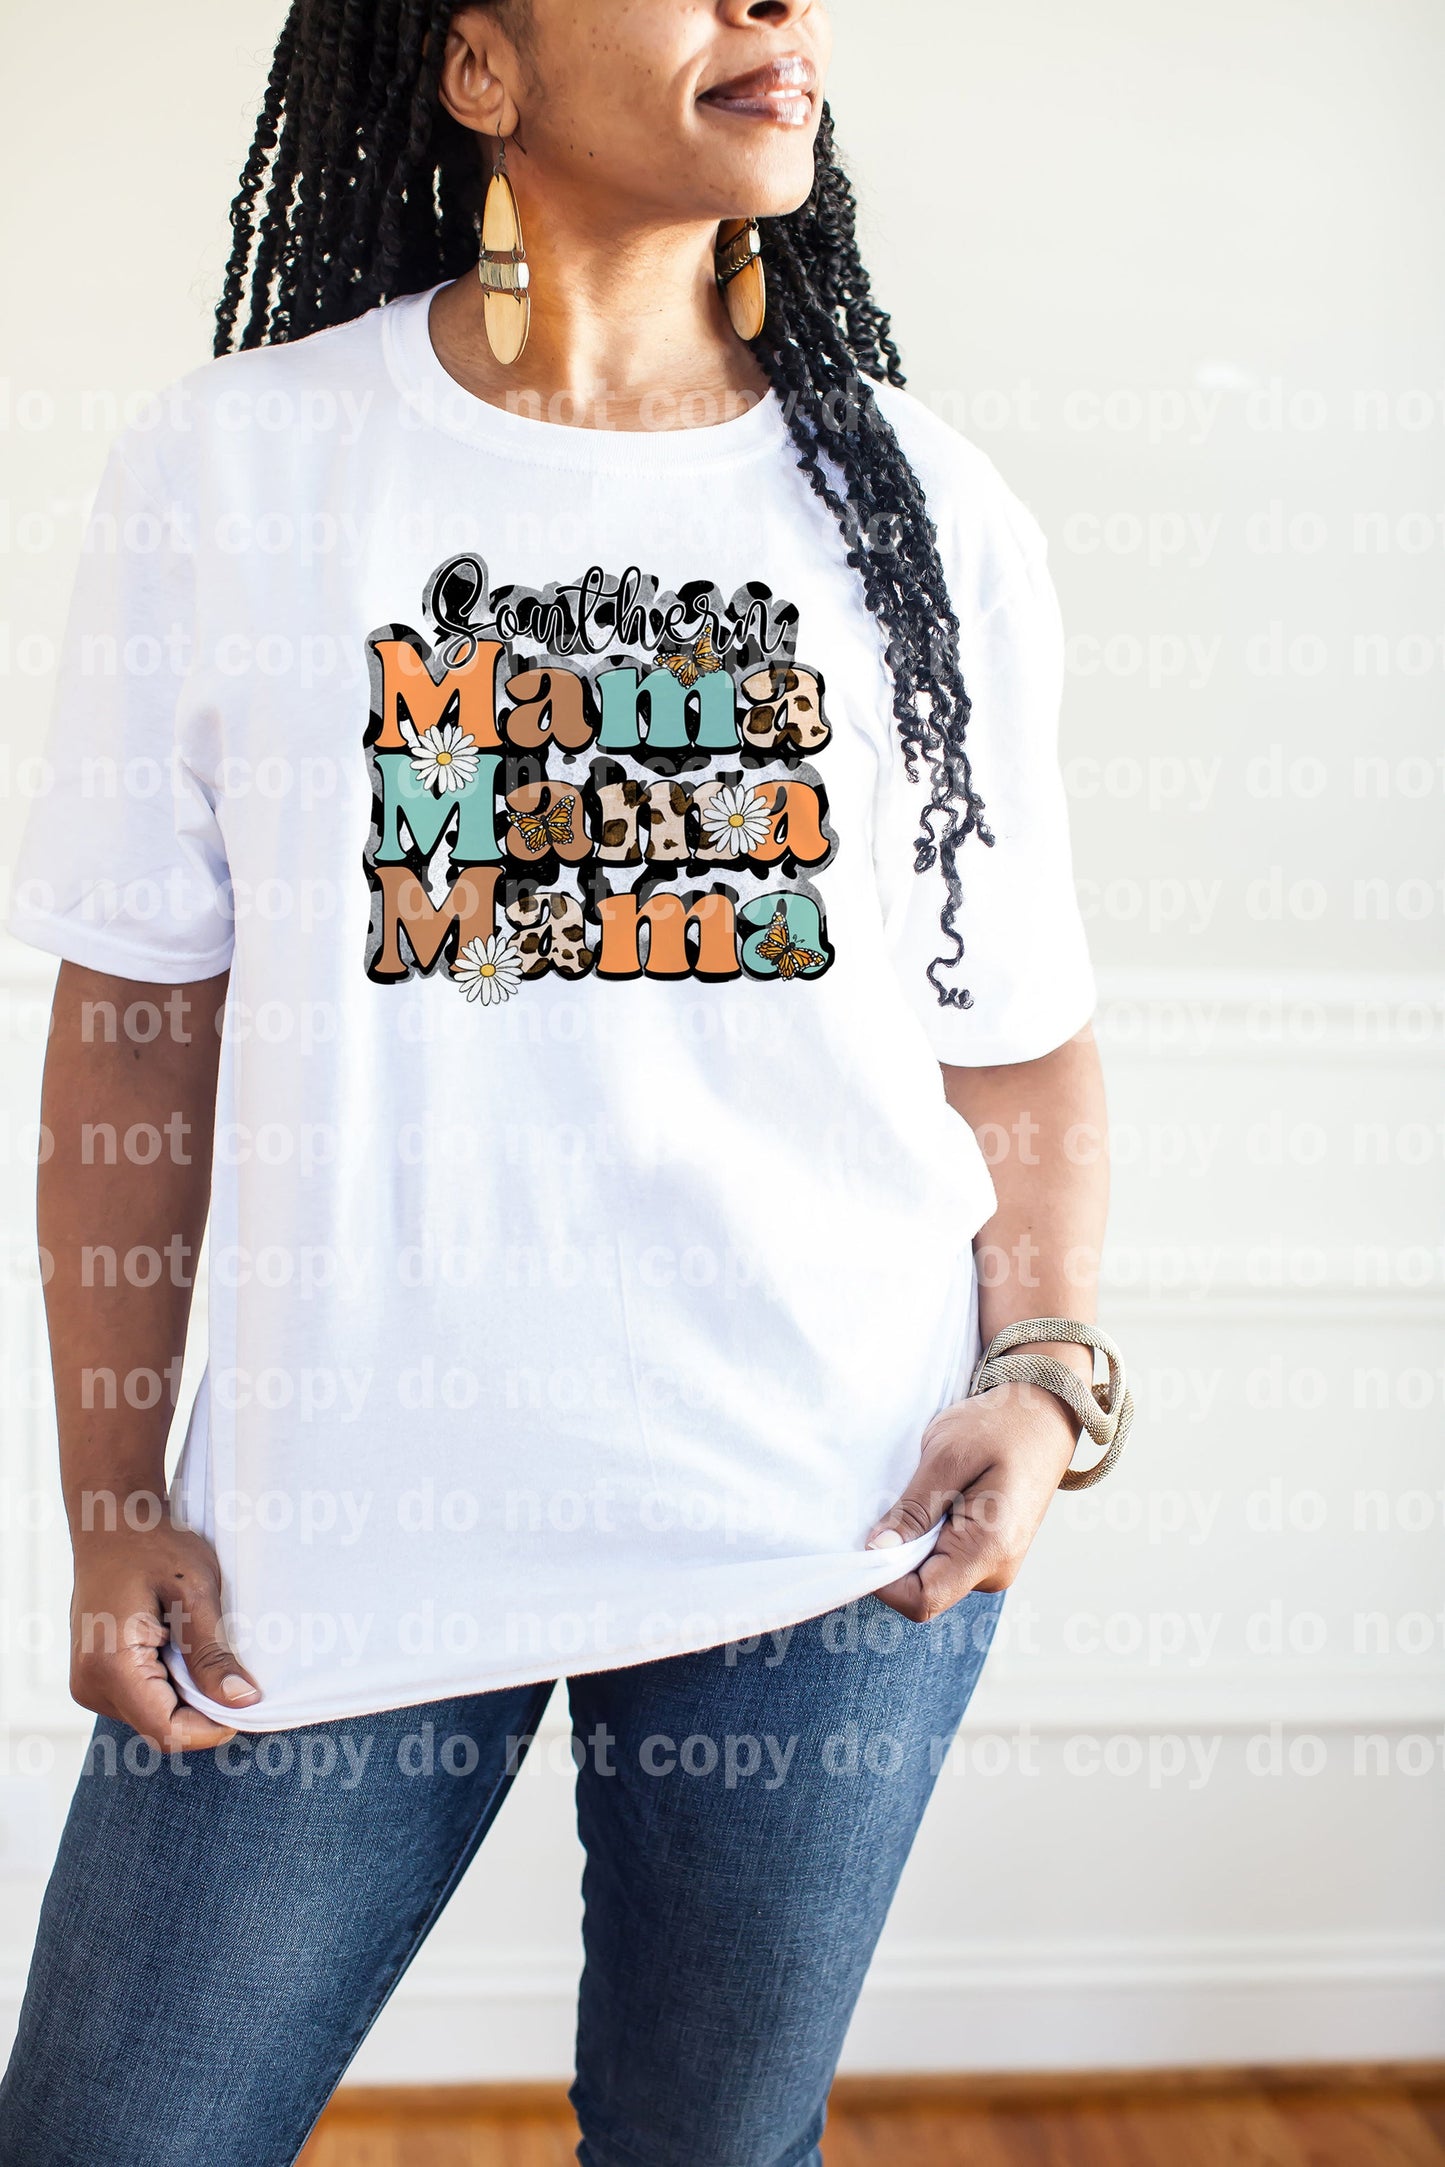 Southern Mama Dream Print or Sublimation Print